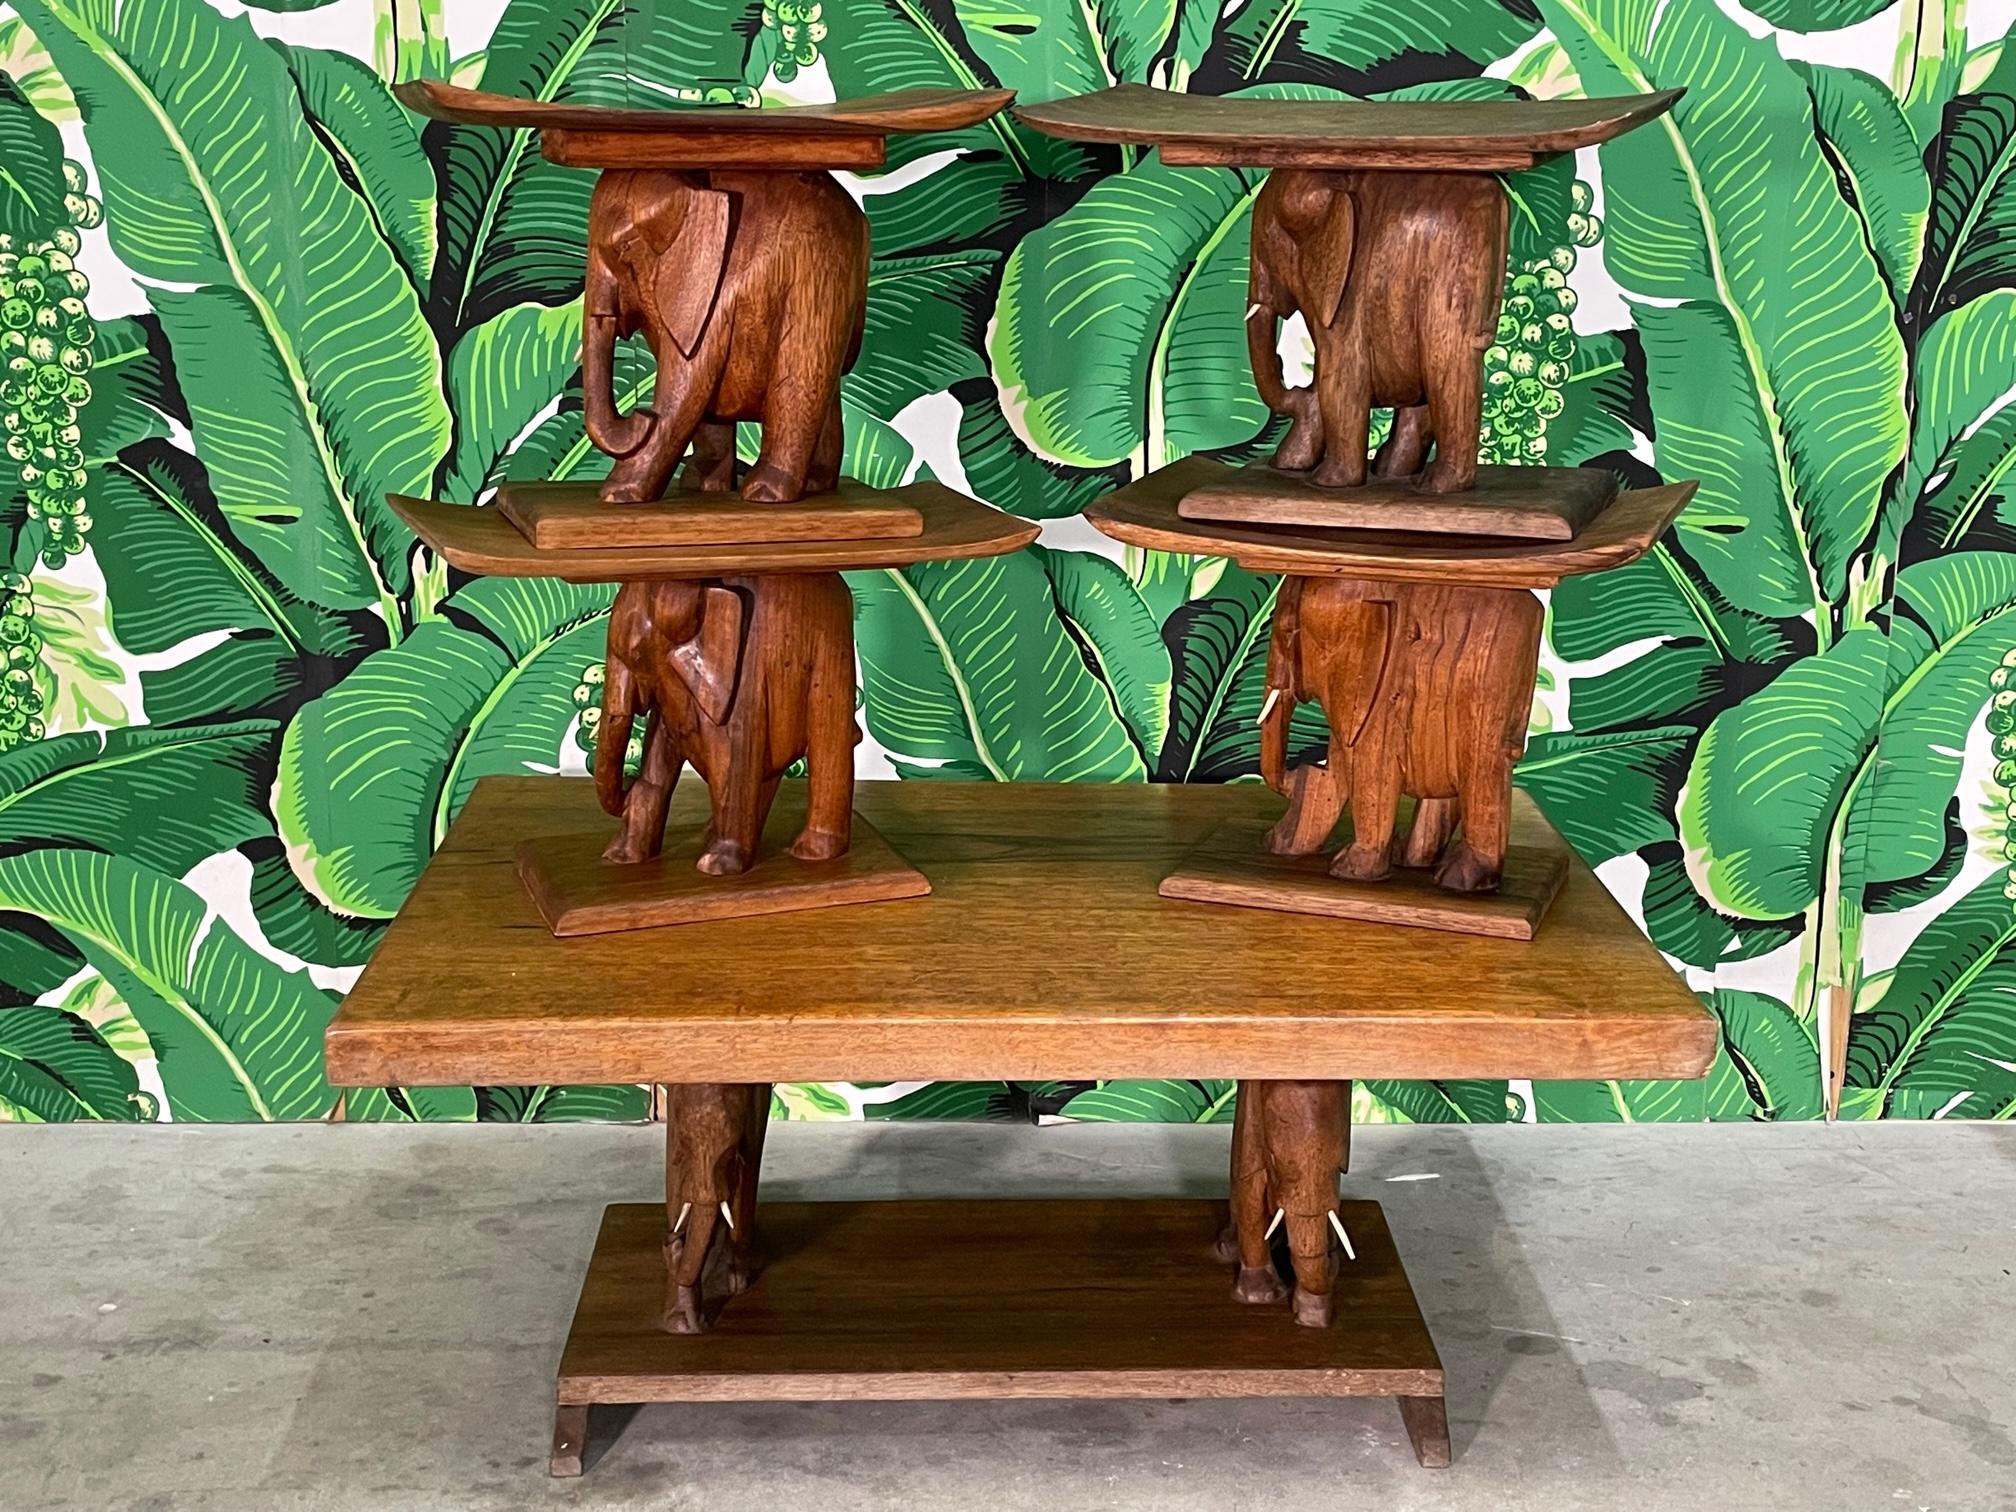 Primitive African Art Deco Ashanti Style Elephant Table and Stools